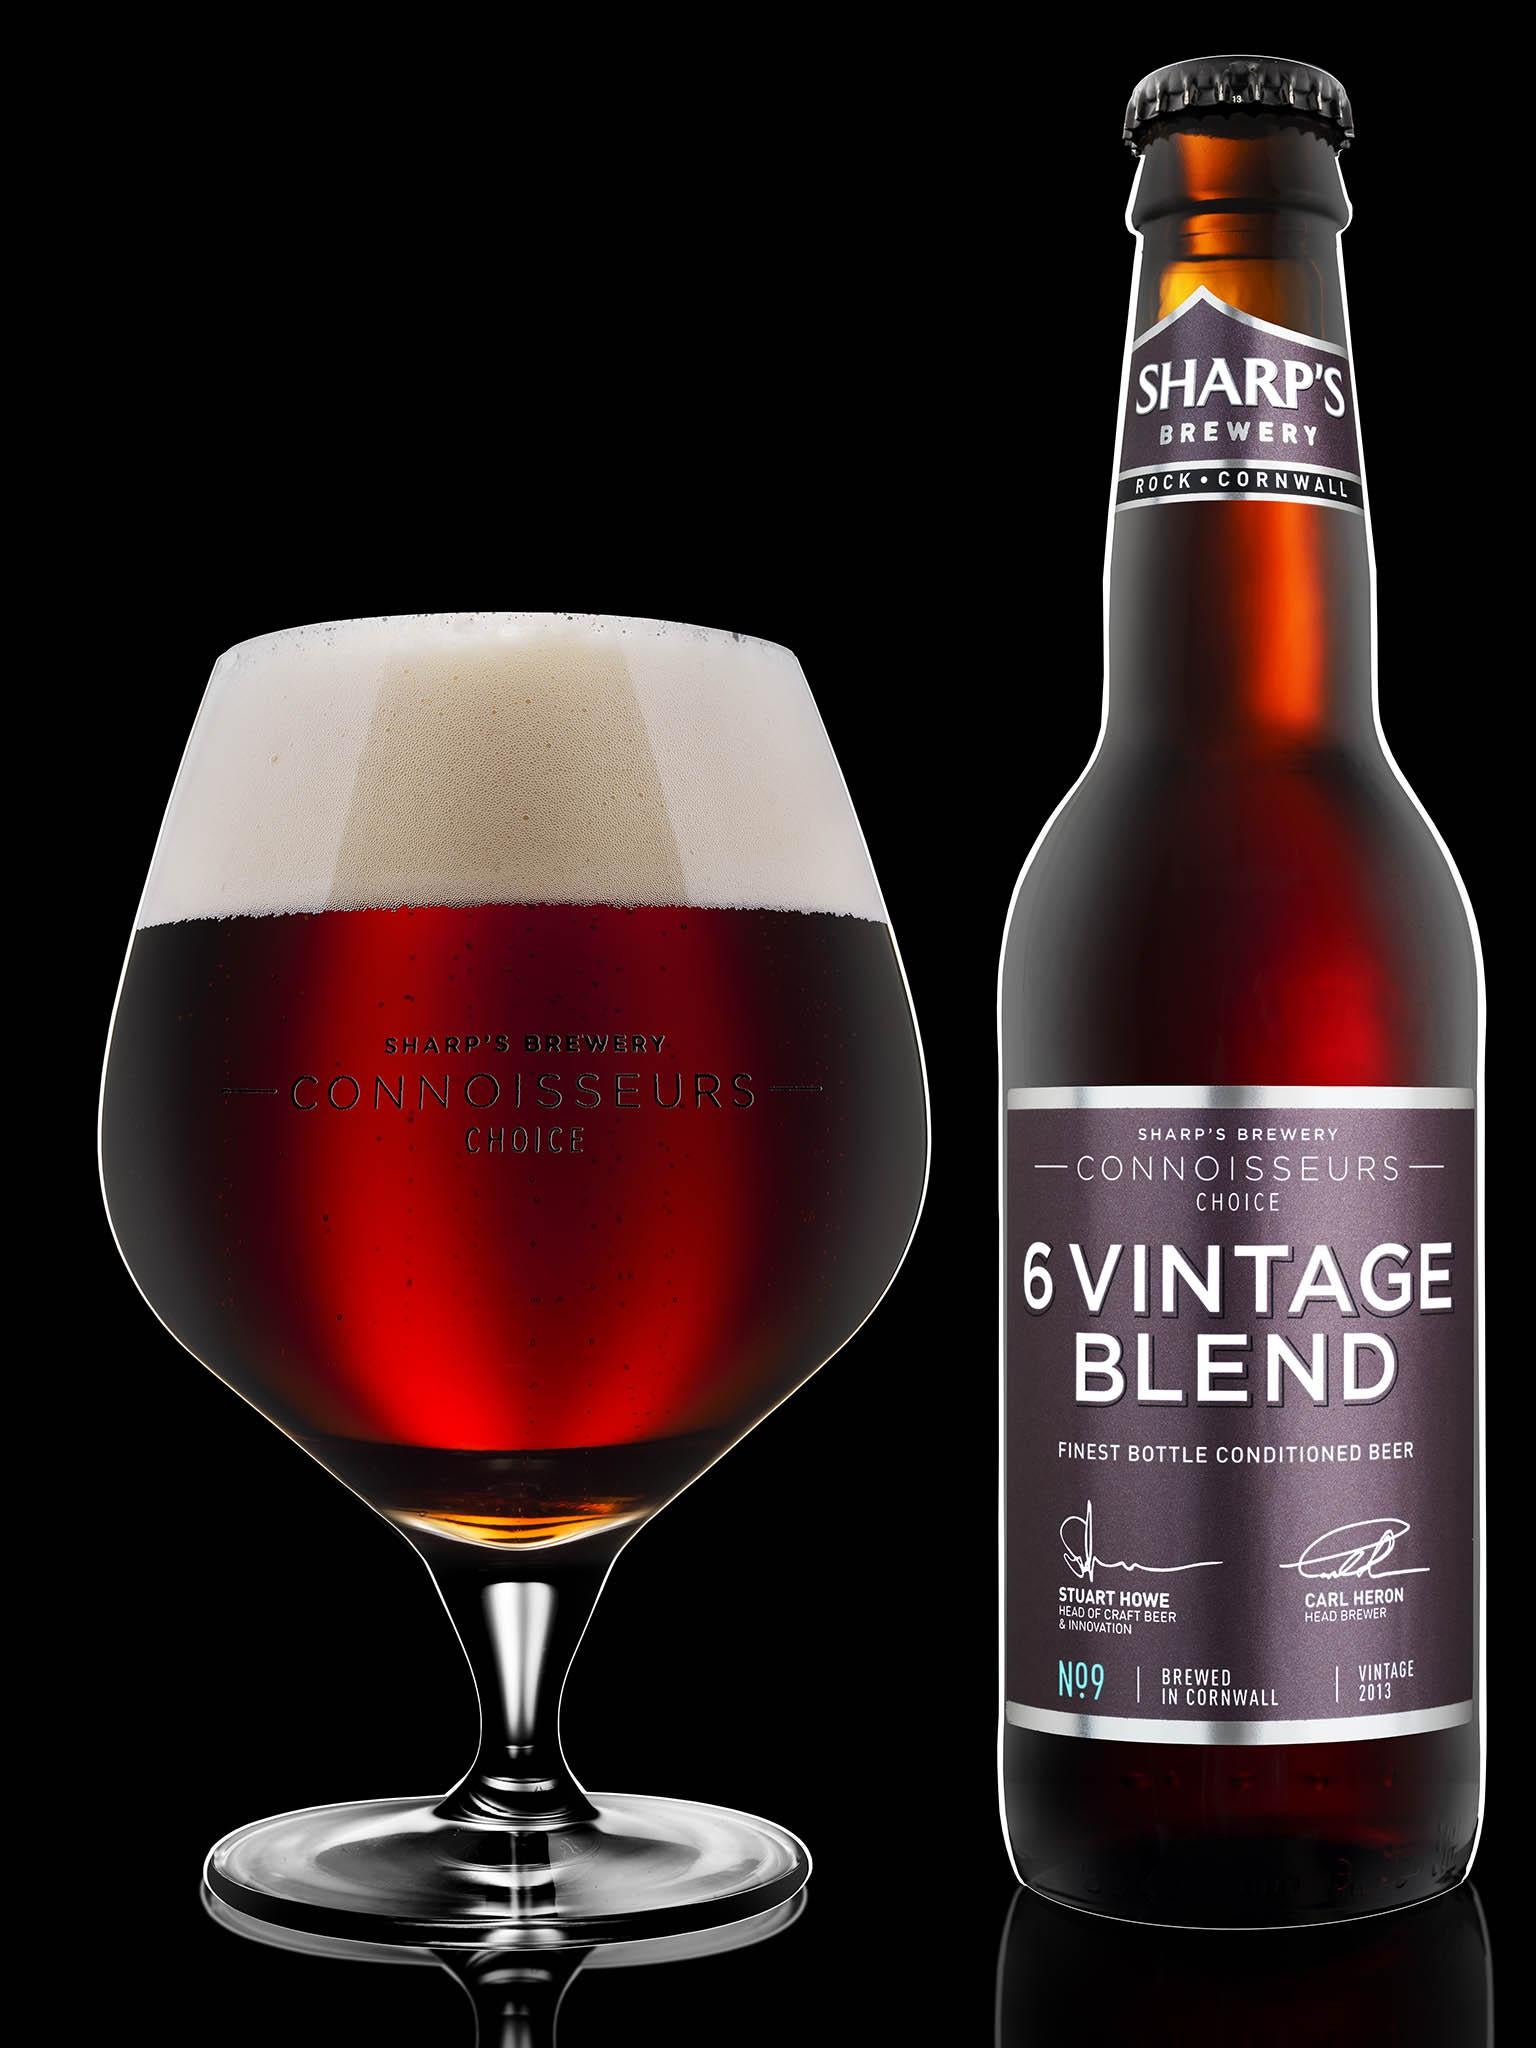 Aged for a month, it is a mix of five diverse beers and blended with a base beer for an aroma of dark stewed fruits